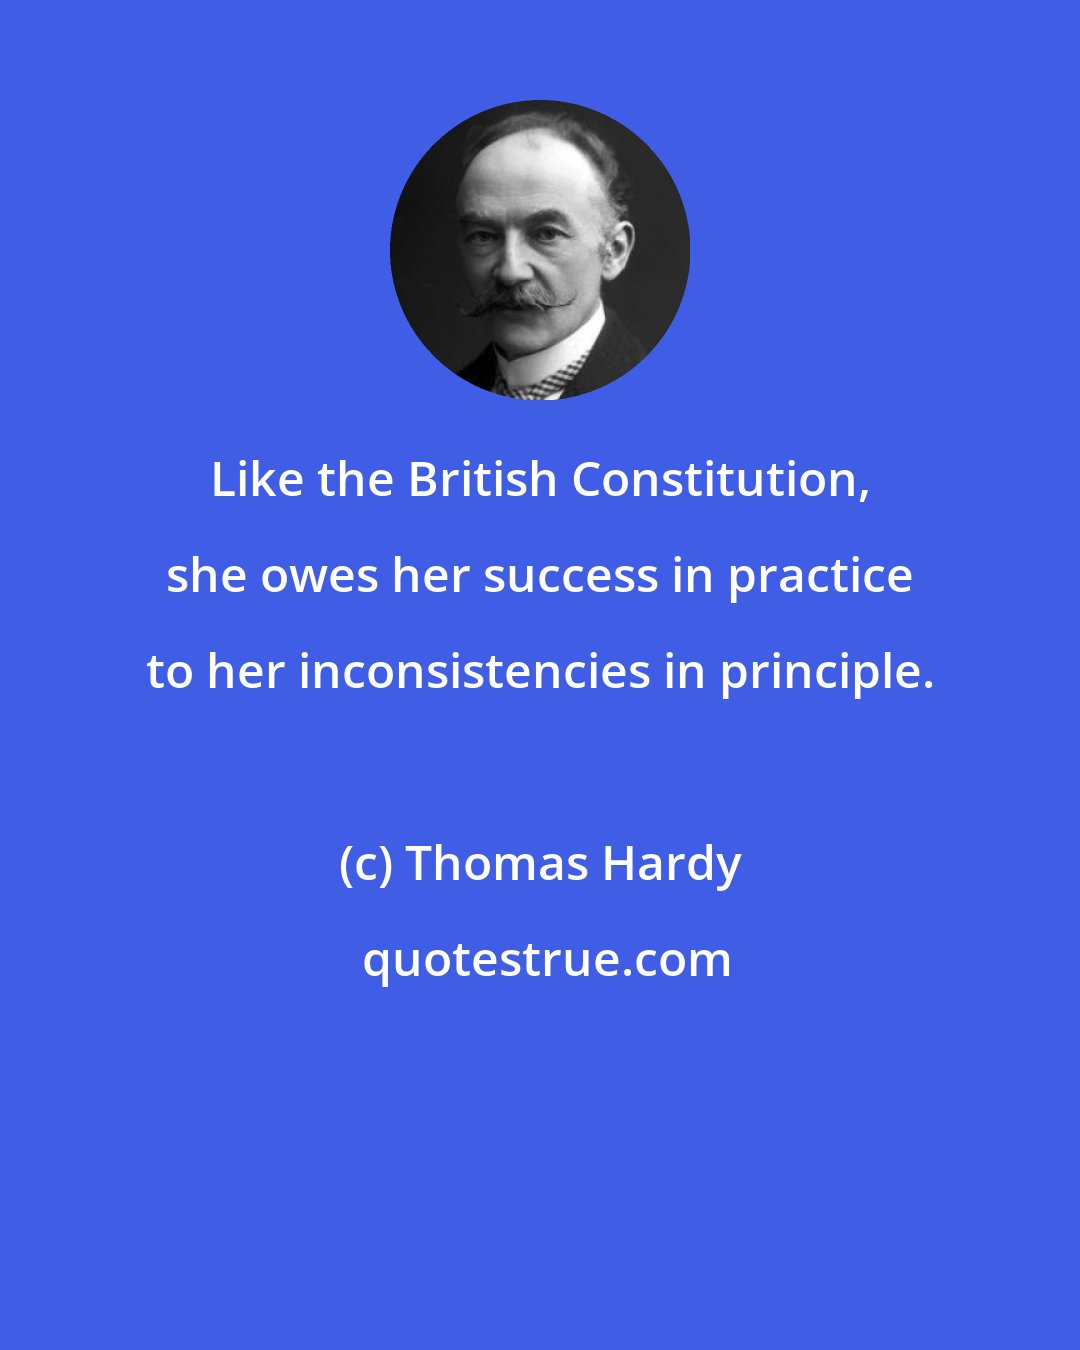 Thomas Hardy: Like the British Constitution, she owes her success in practice to her inconsistencies in principle.